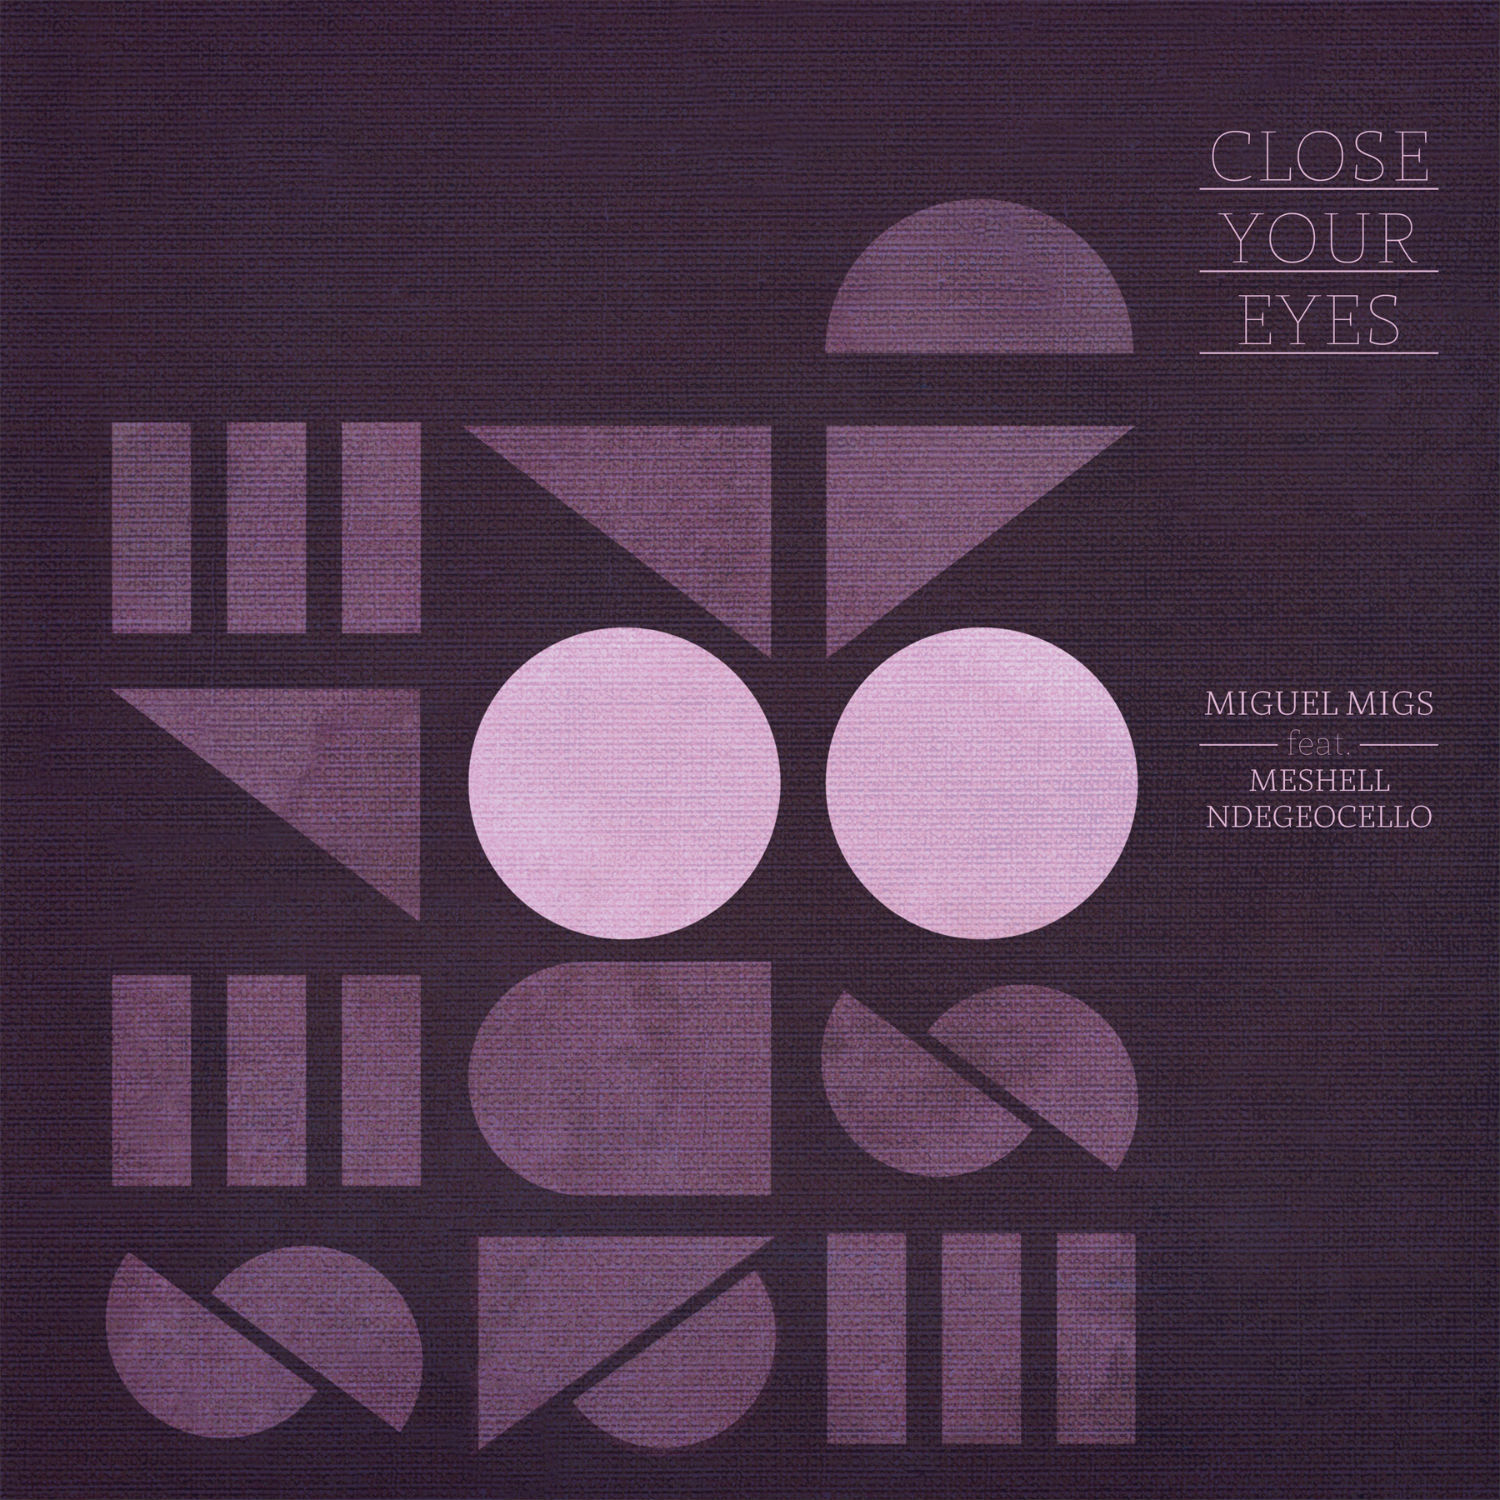 Miguel Migs - Close Your Eyes (feat. Meshell Ndegeocello) 